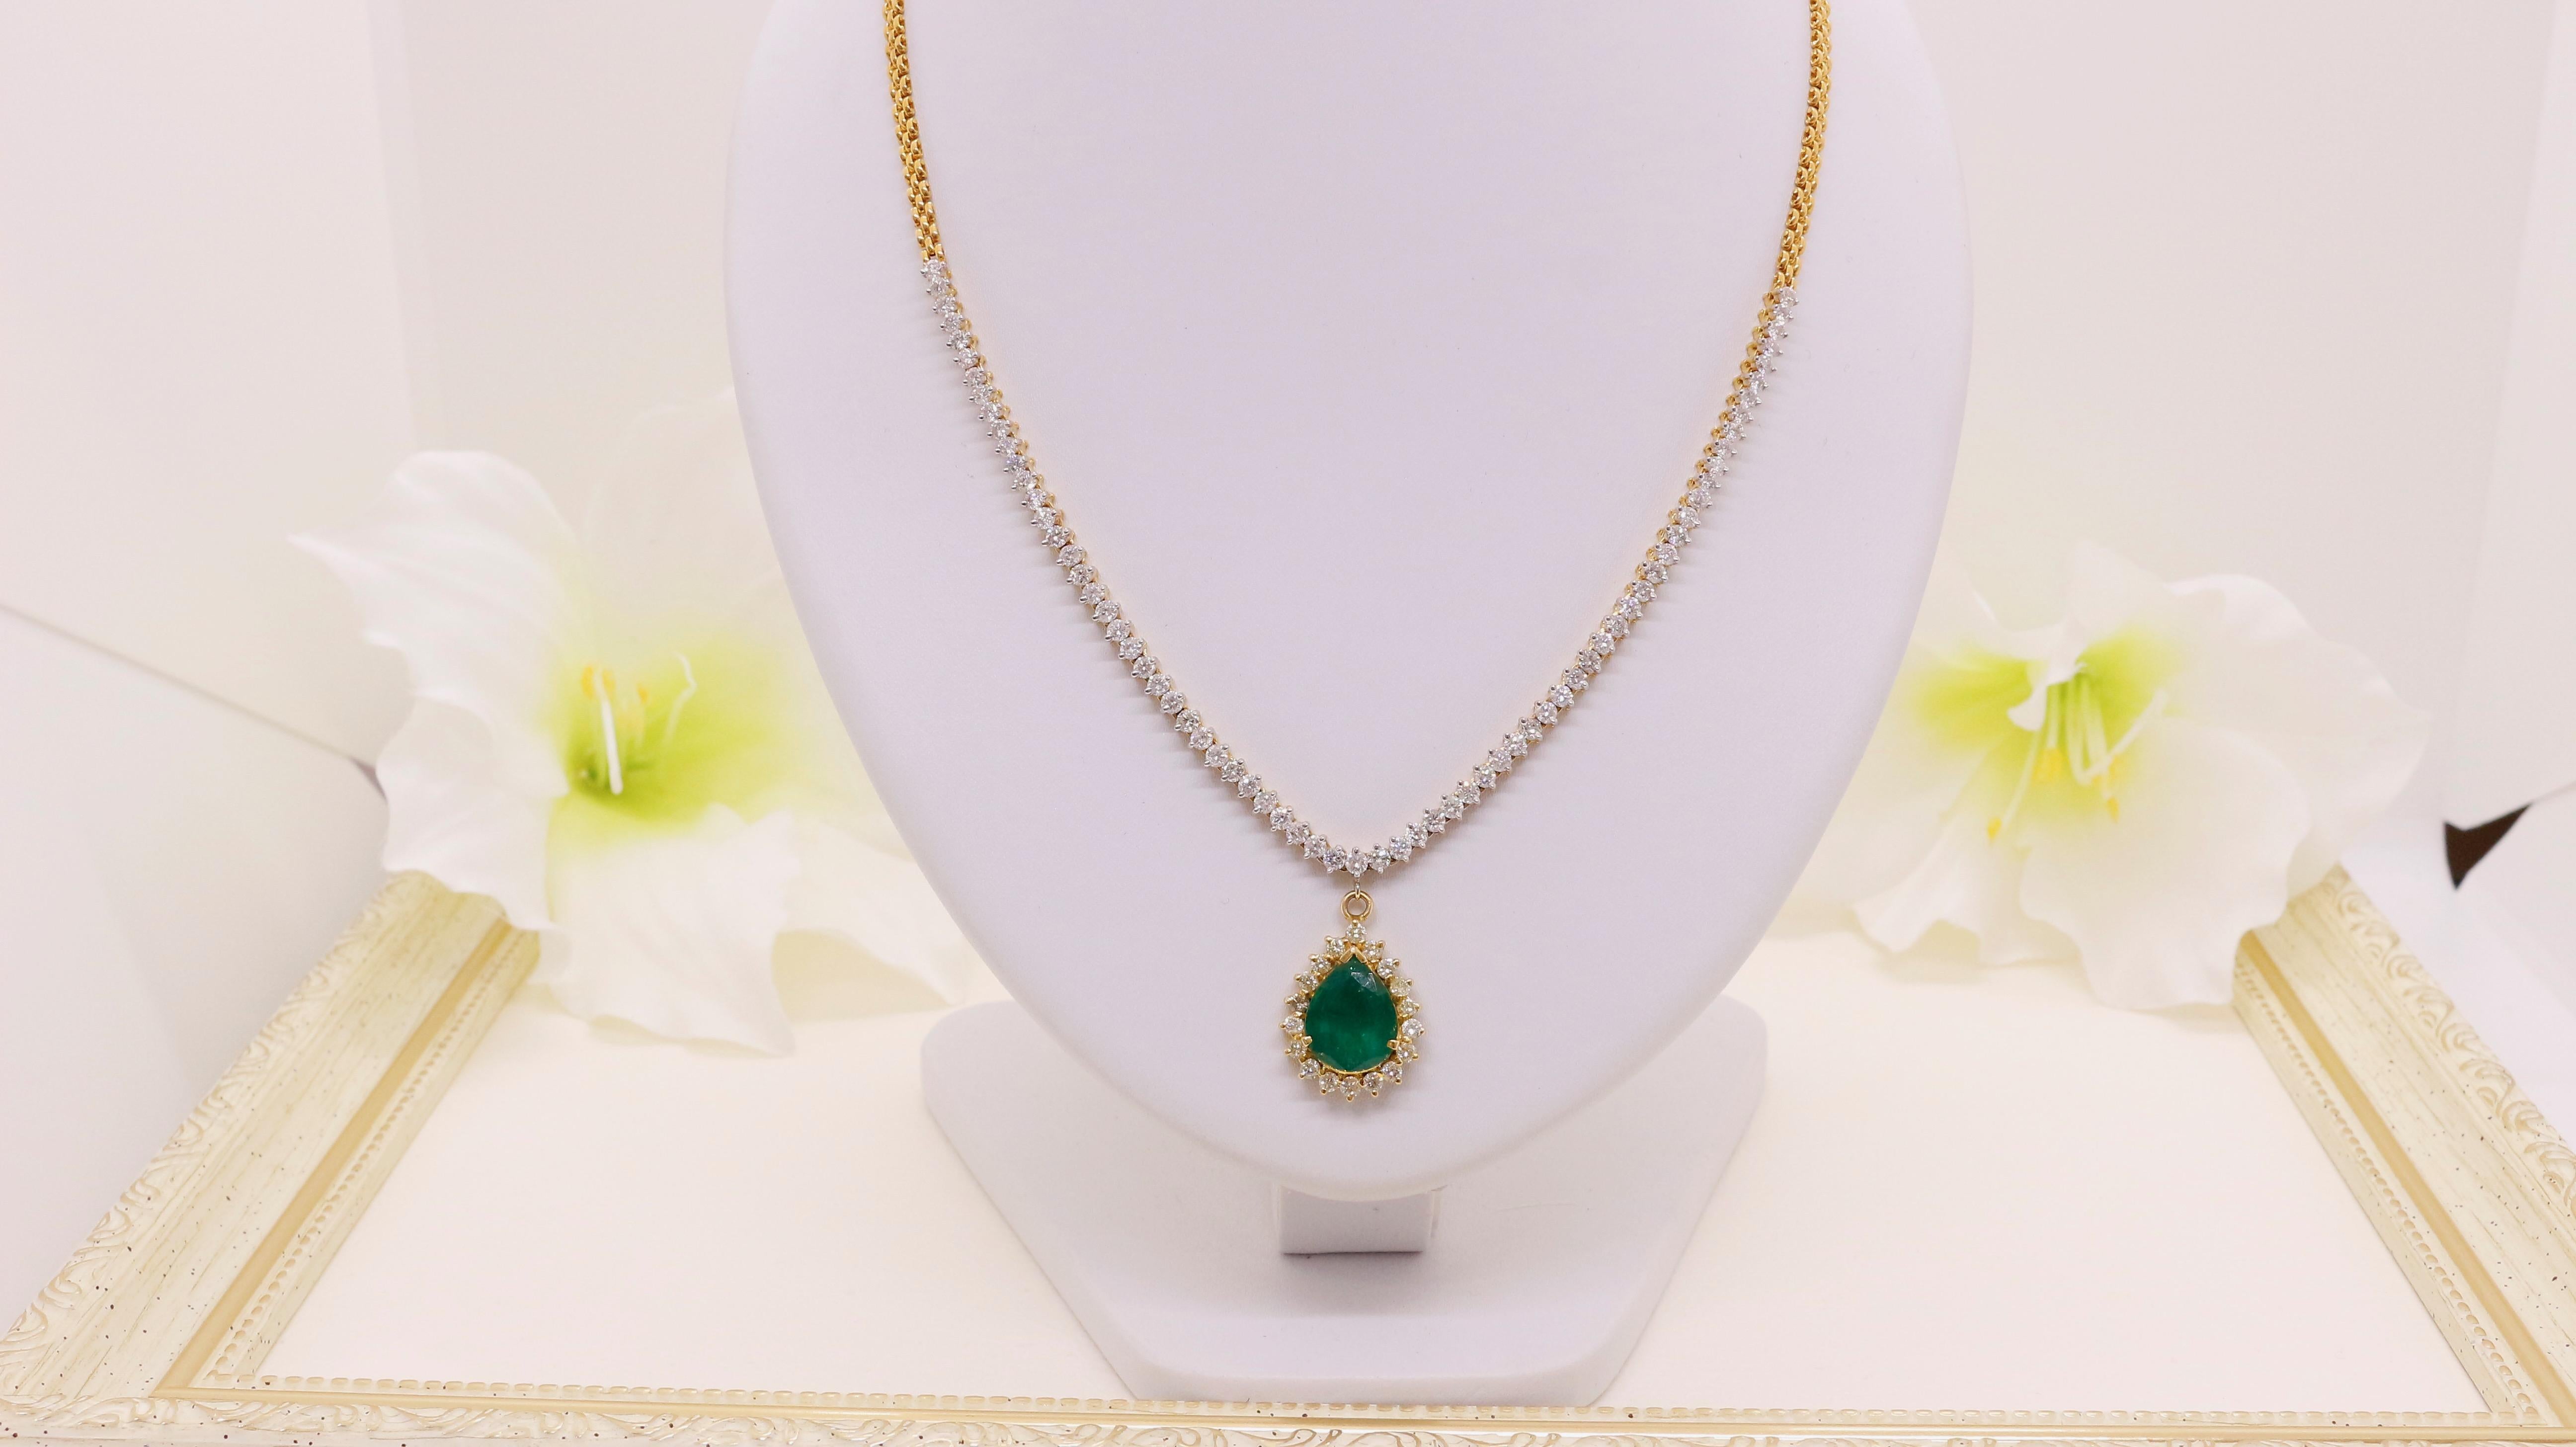 Introducing our exquisite Drop Shape Emerald with Diamond Necklace, handcrafted in 18kt gold. As one of our best-selling pieces, this necklace is a true embodiment of luxury and elegance.

At the heart of the necklace lies a stunning drop-shaped